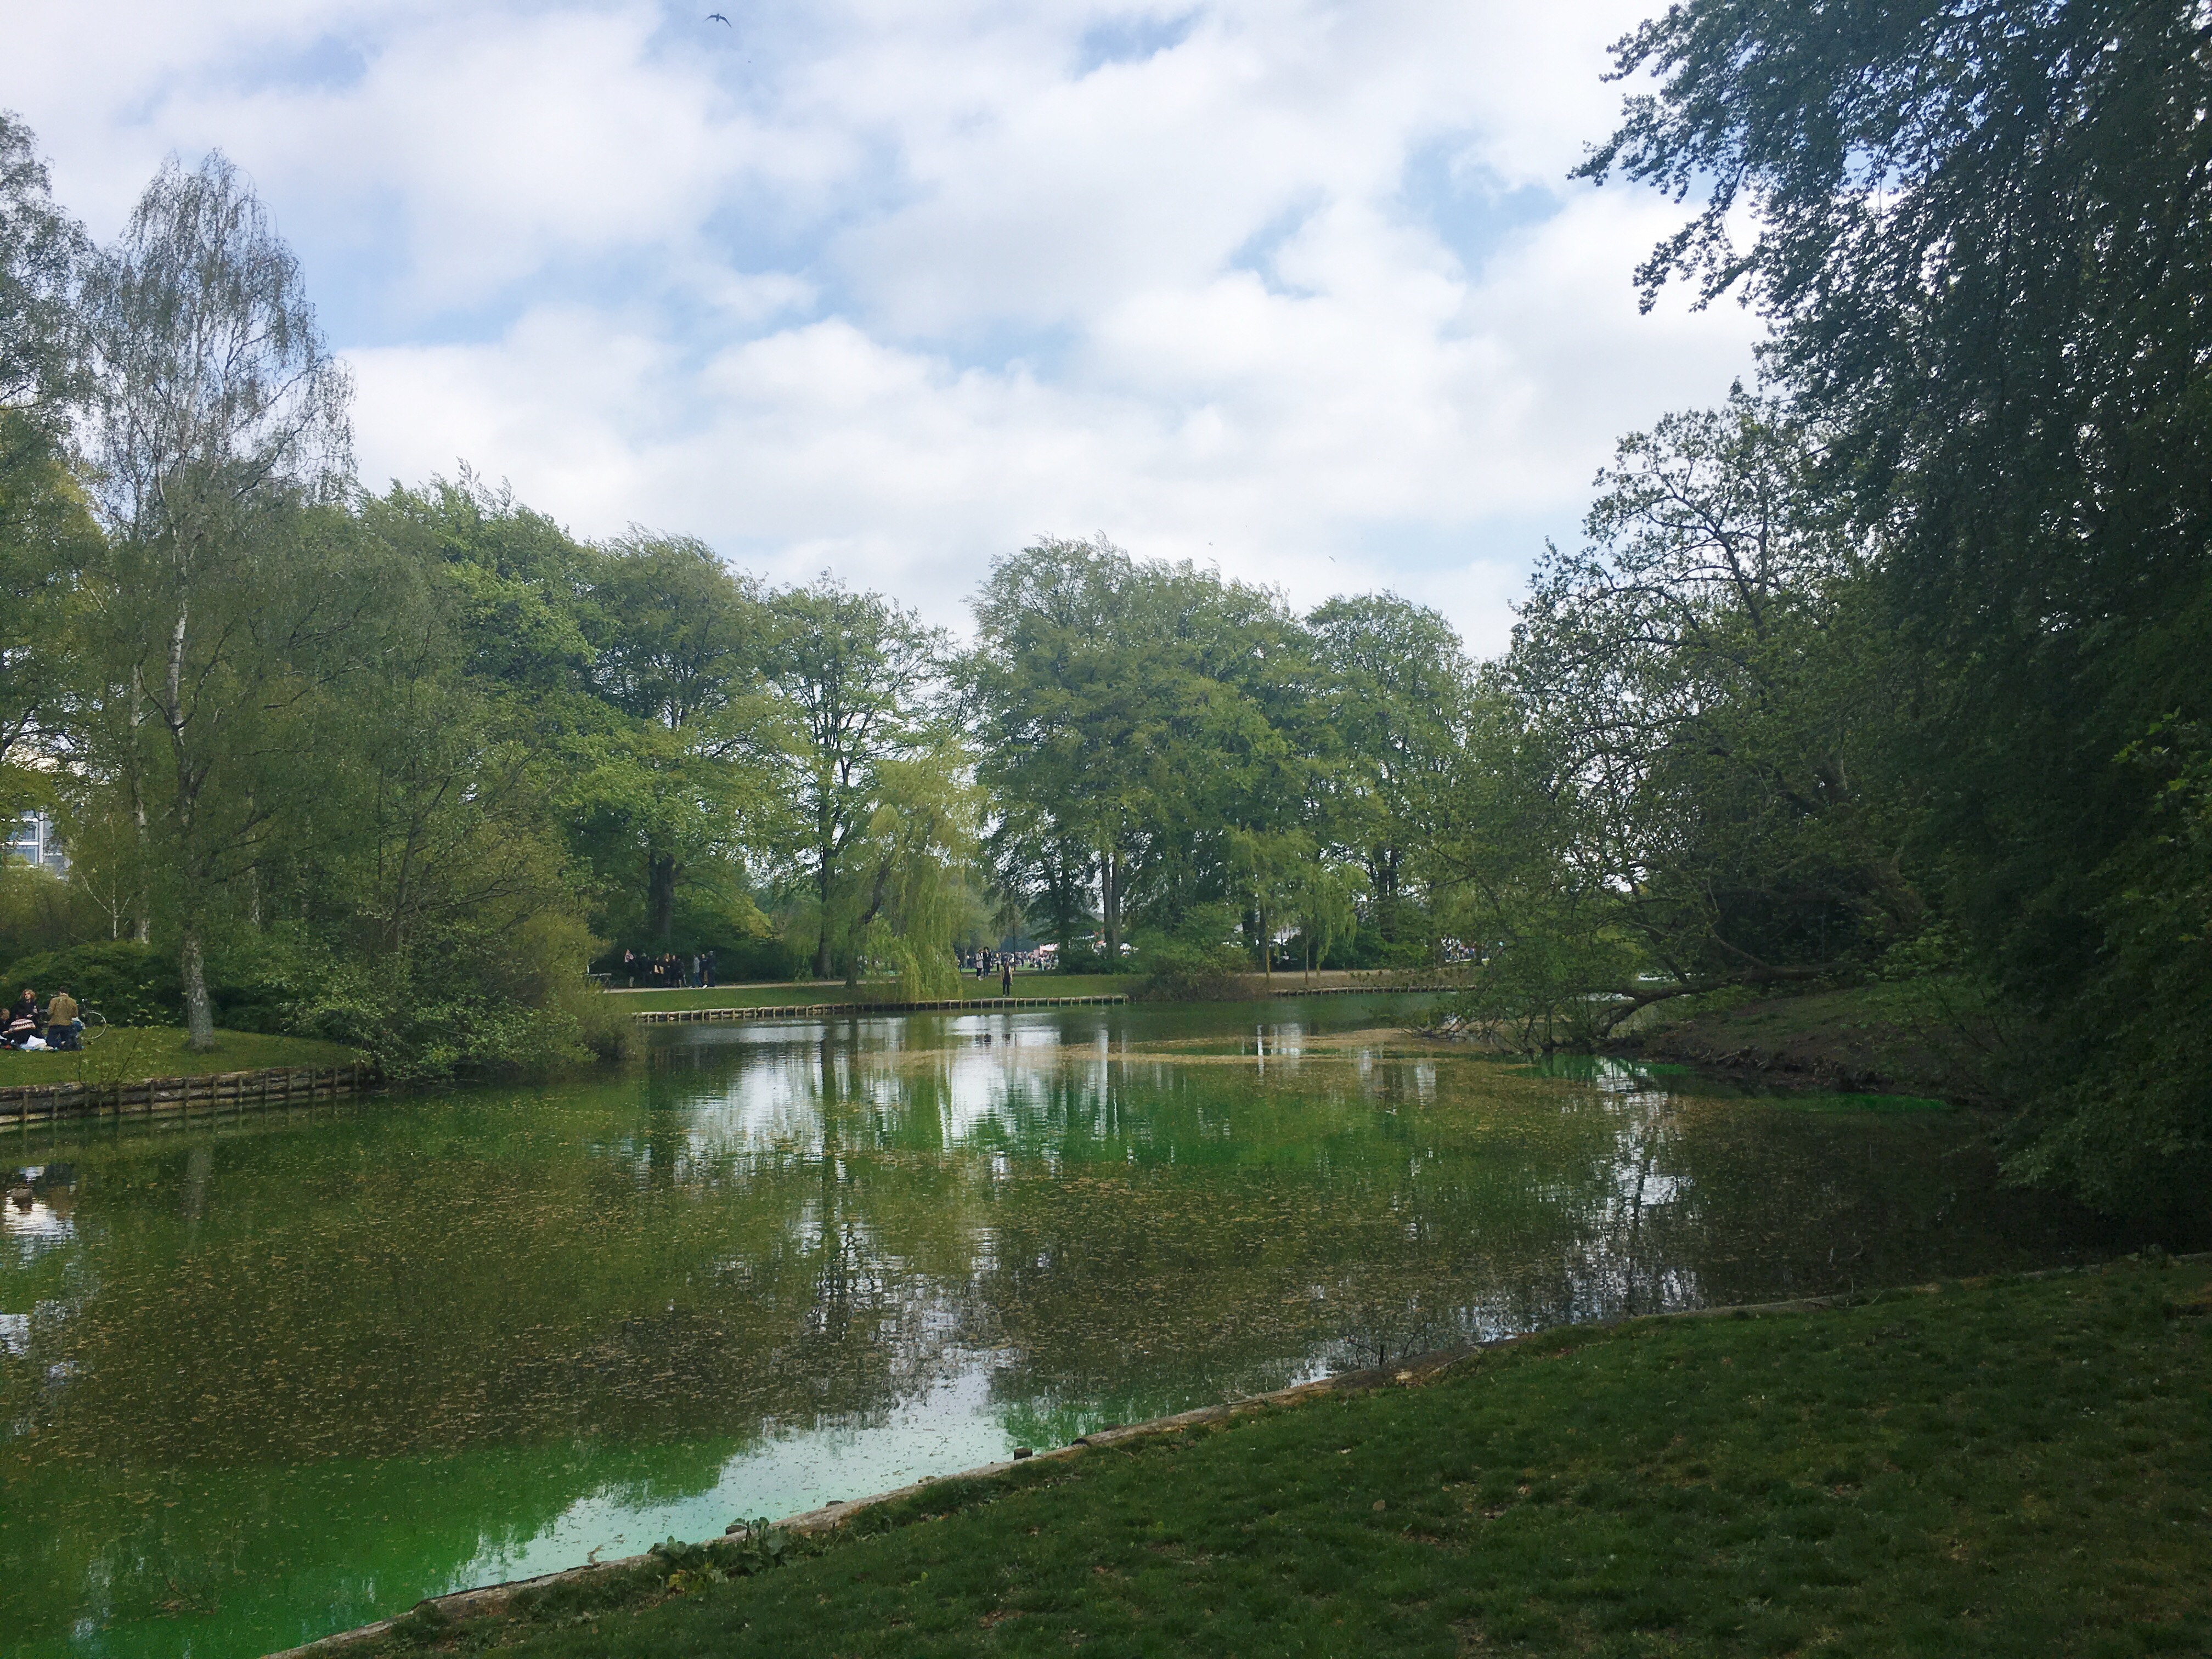 The lake in parken 2019